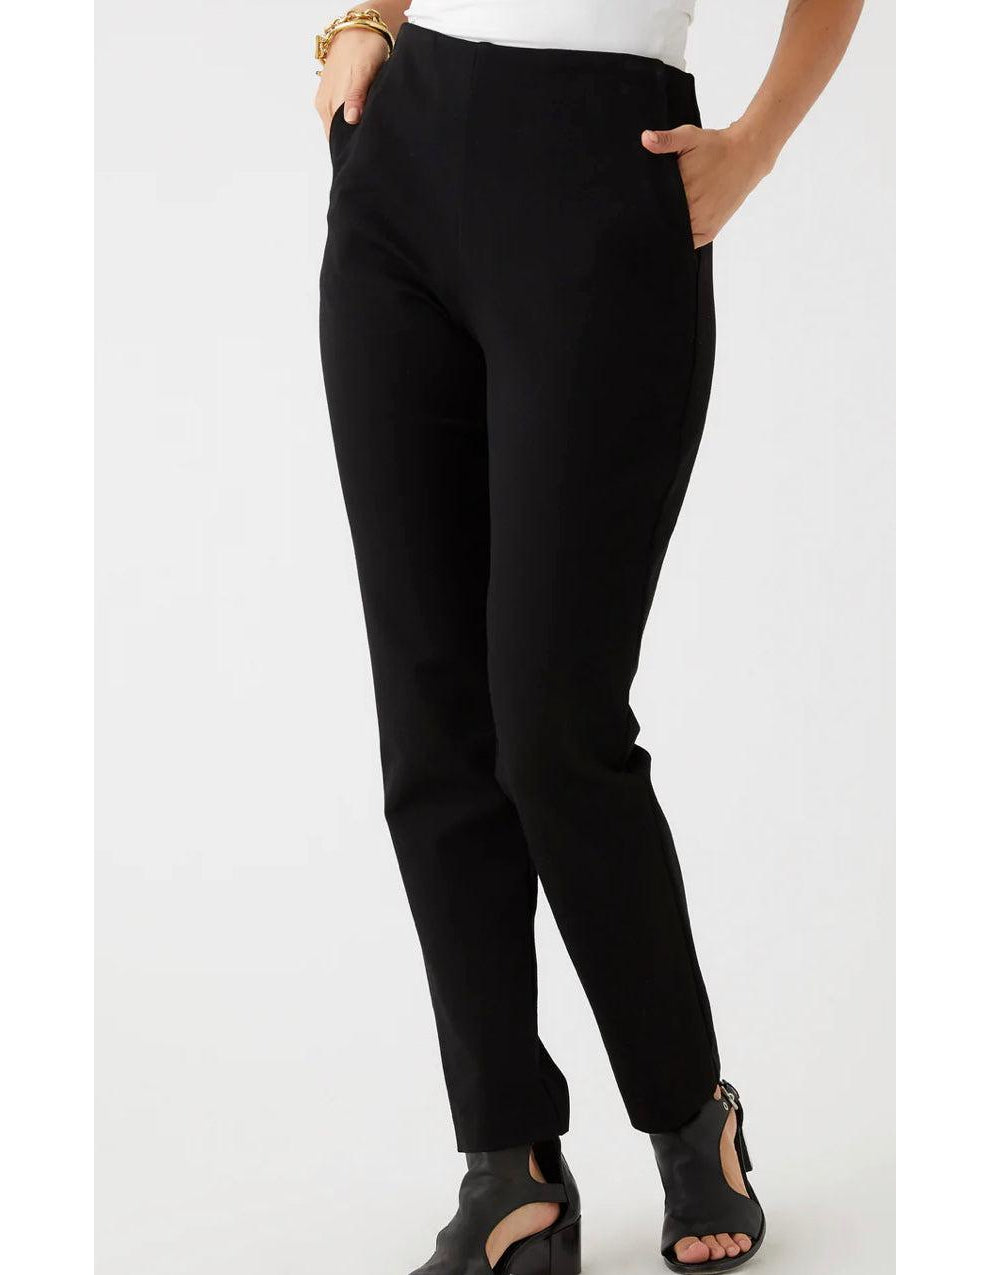 Classic Straight Leg Pant - Southern Muse Boutique